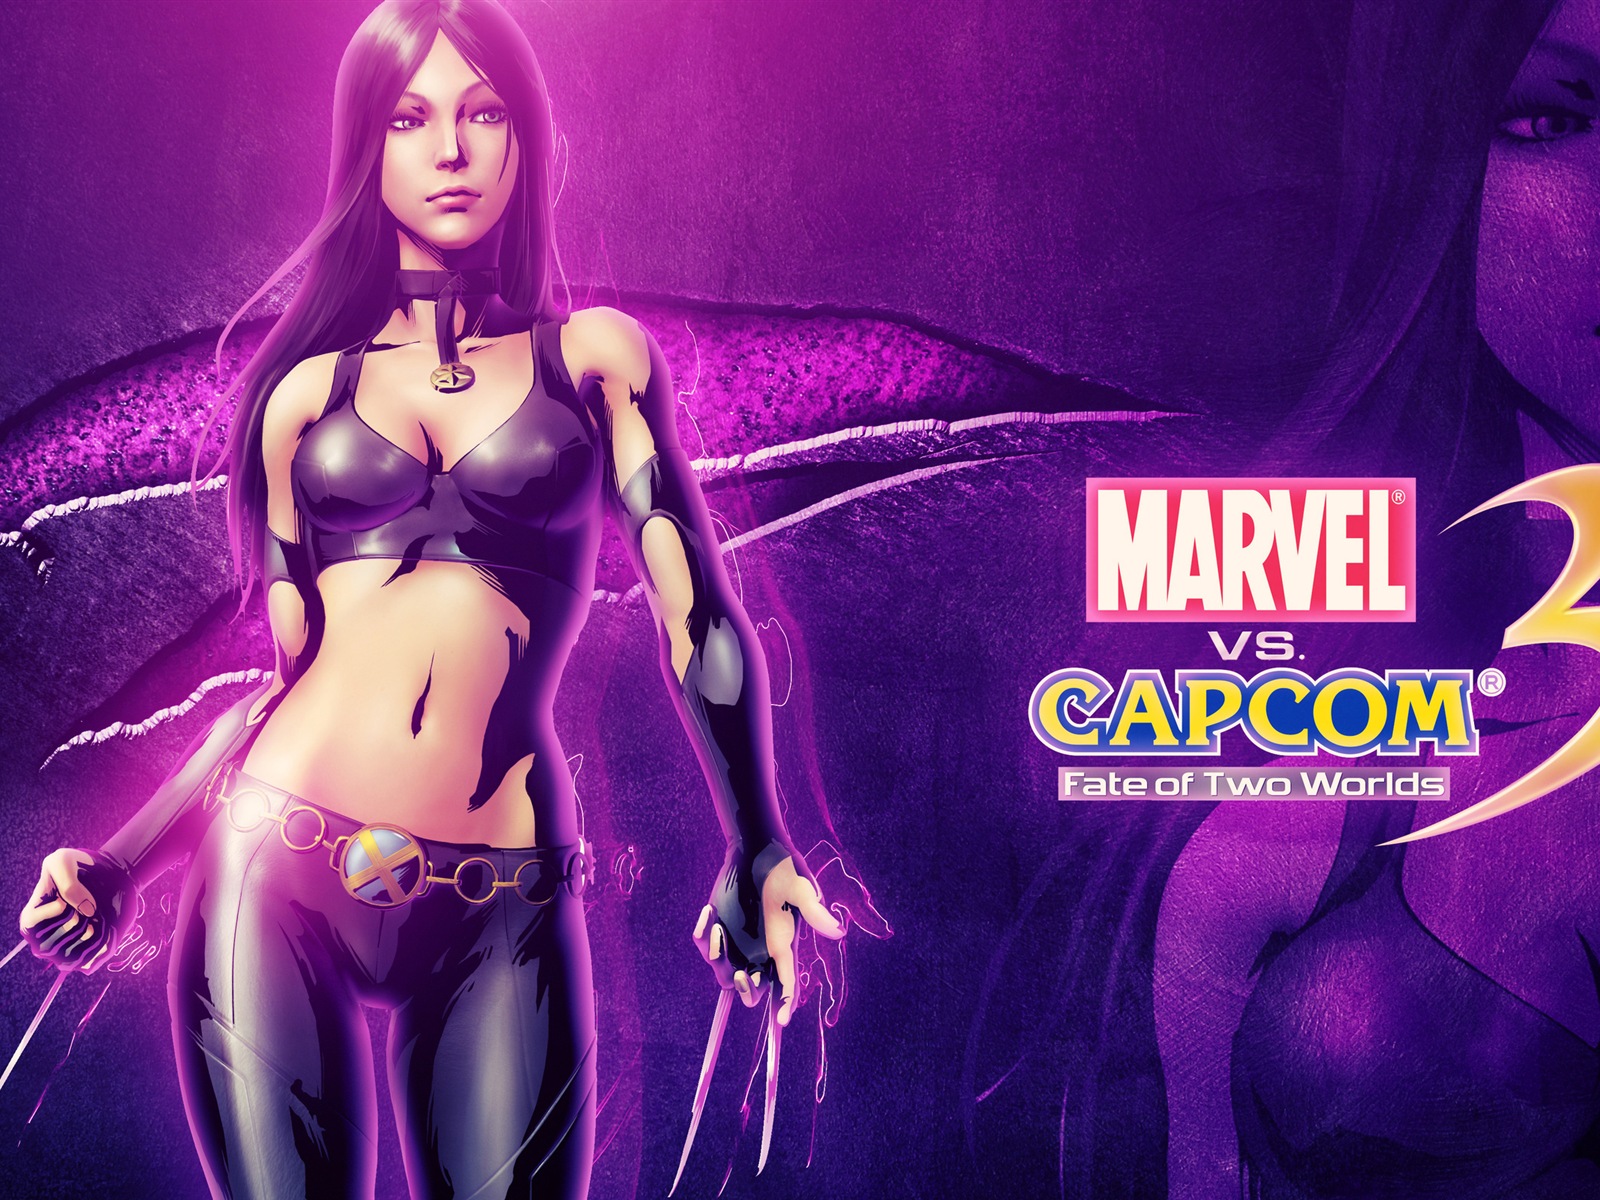 Marvel VS. Capcom 3: Fate of Two Worlds HD game wallpapers #10 - 1600x1200